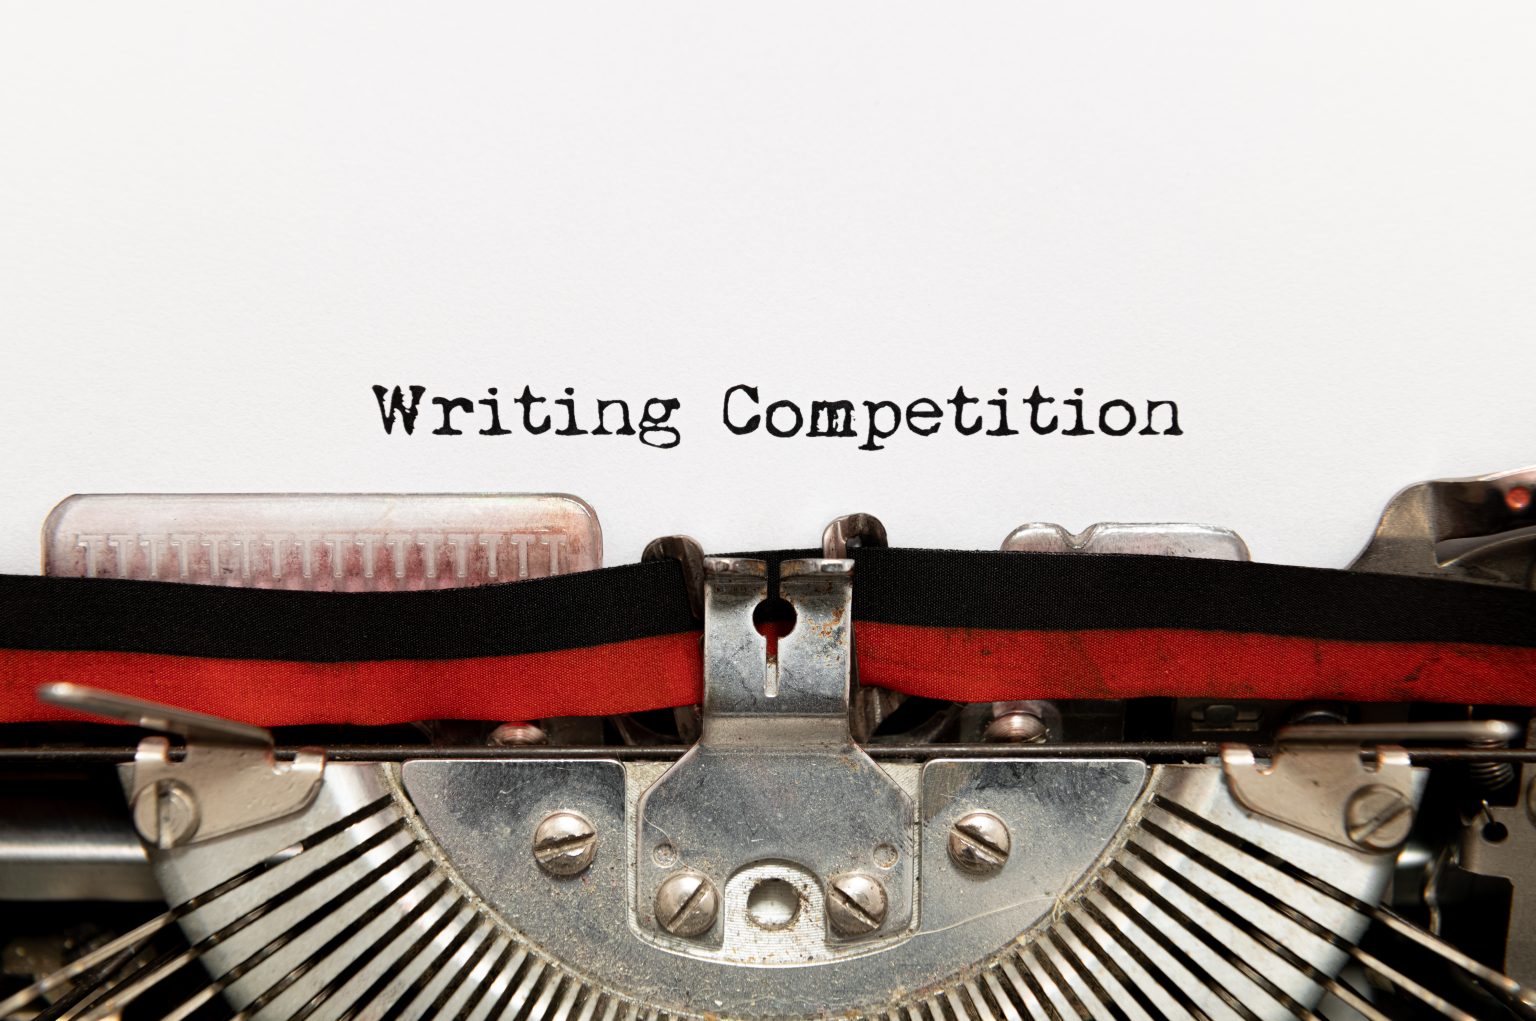 Writing Competitions for High School Students